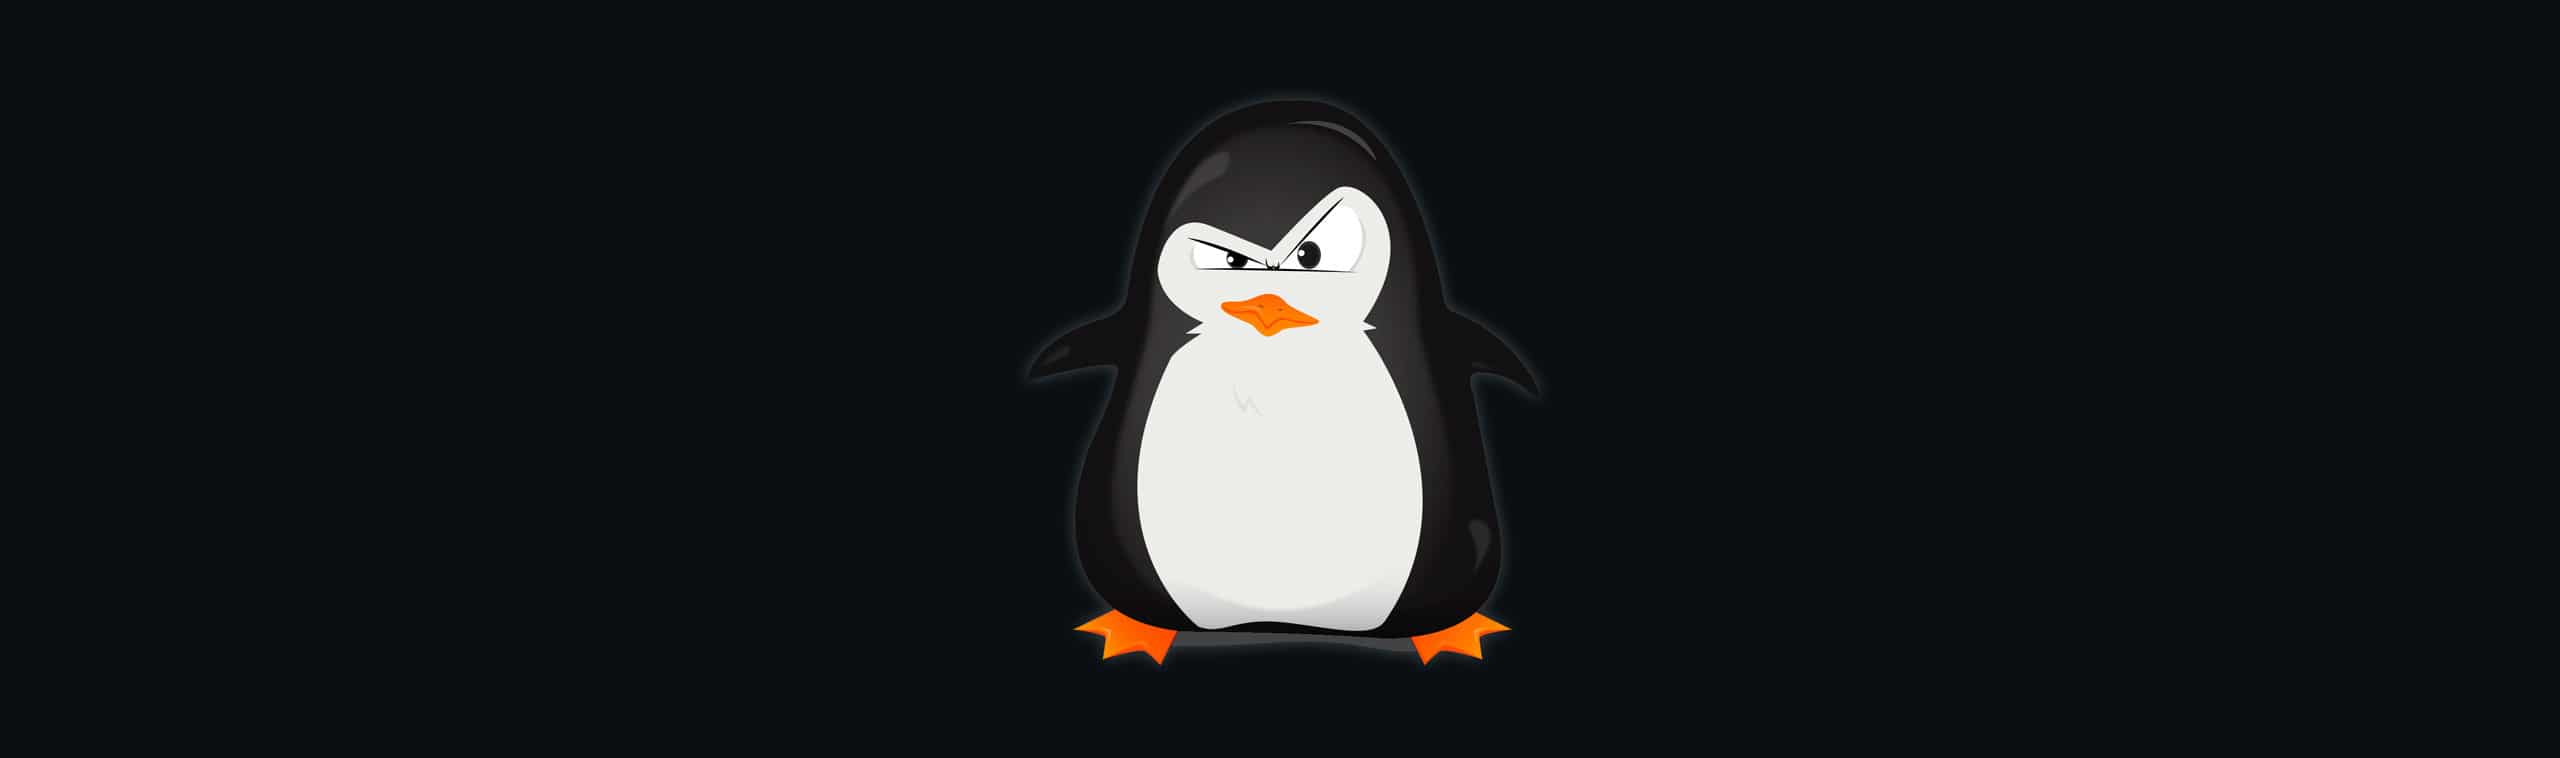 An angry looking cartoon penguin